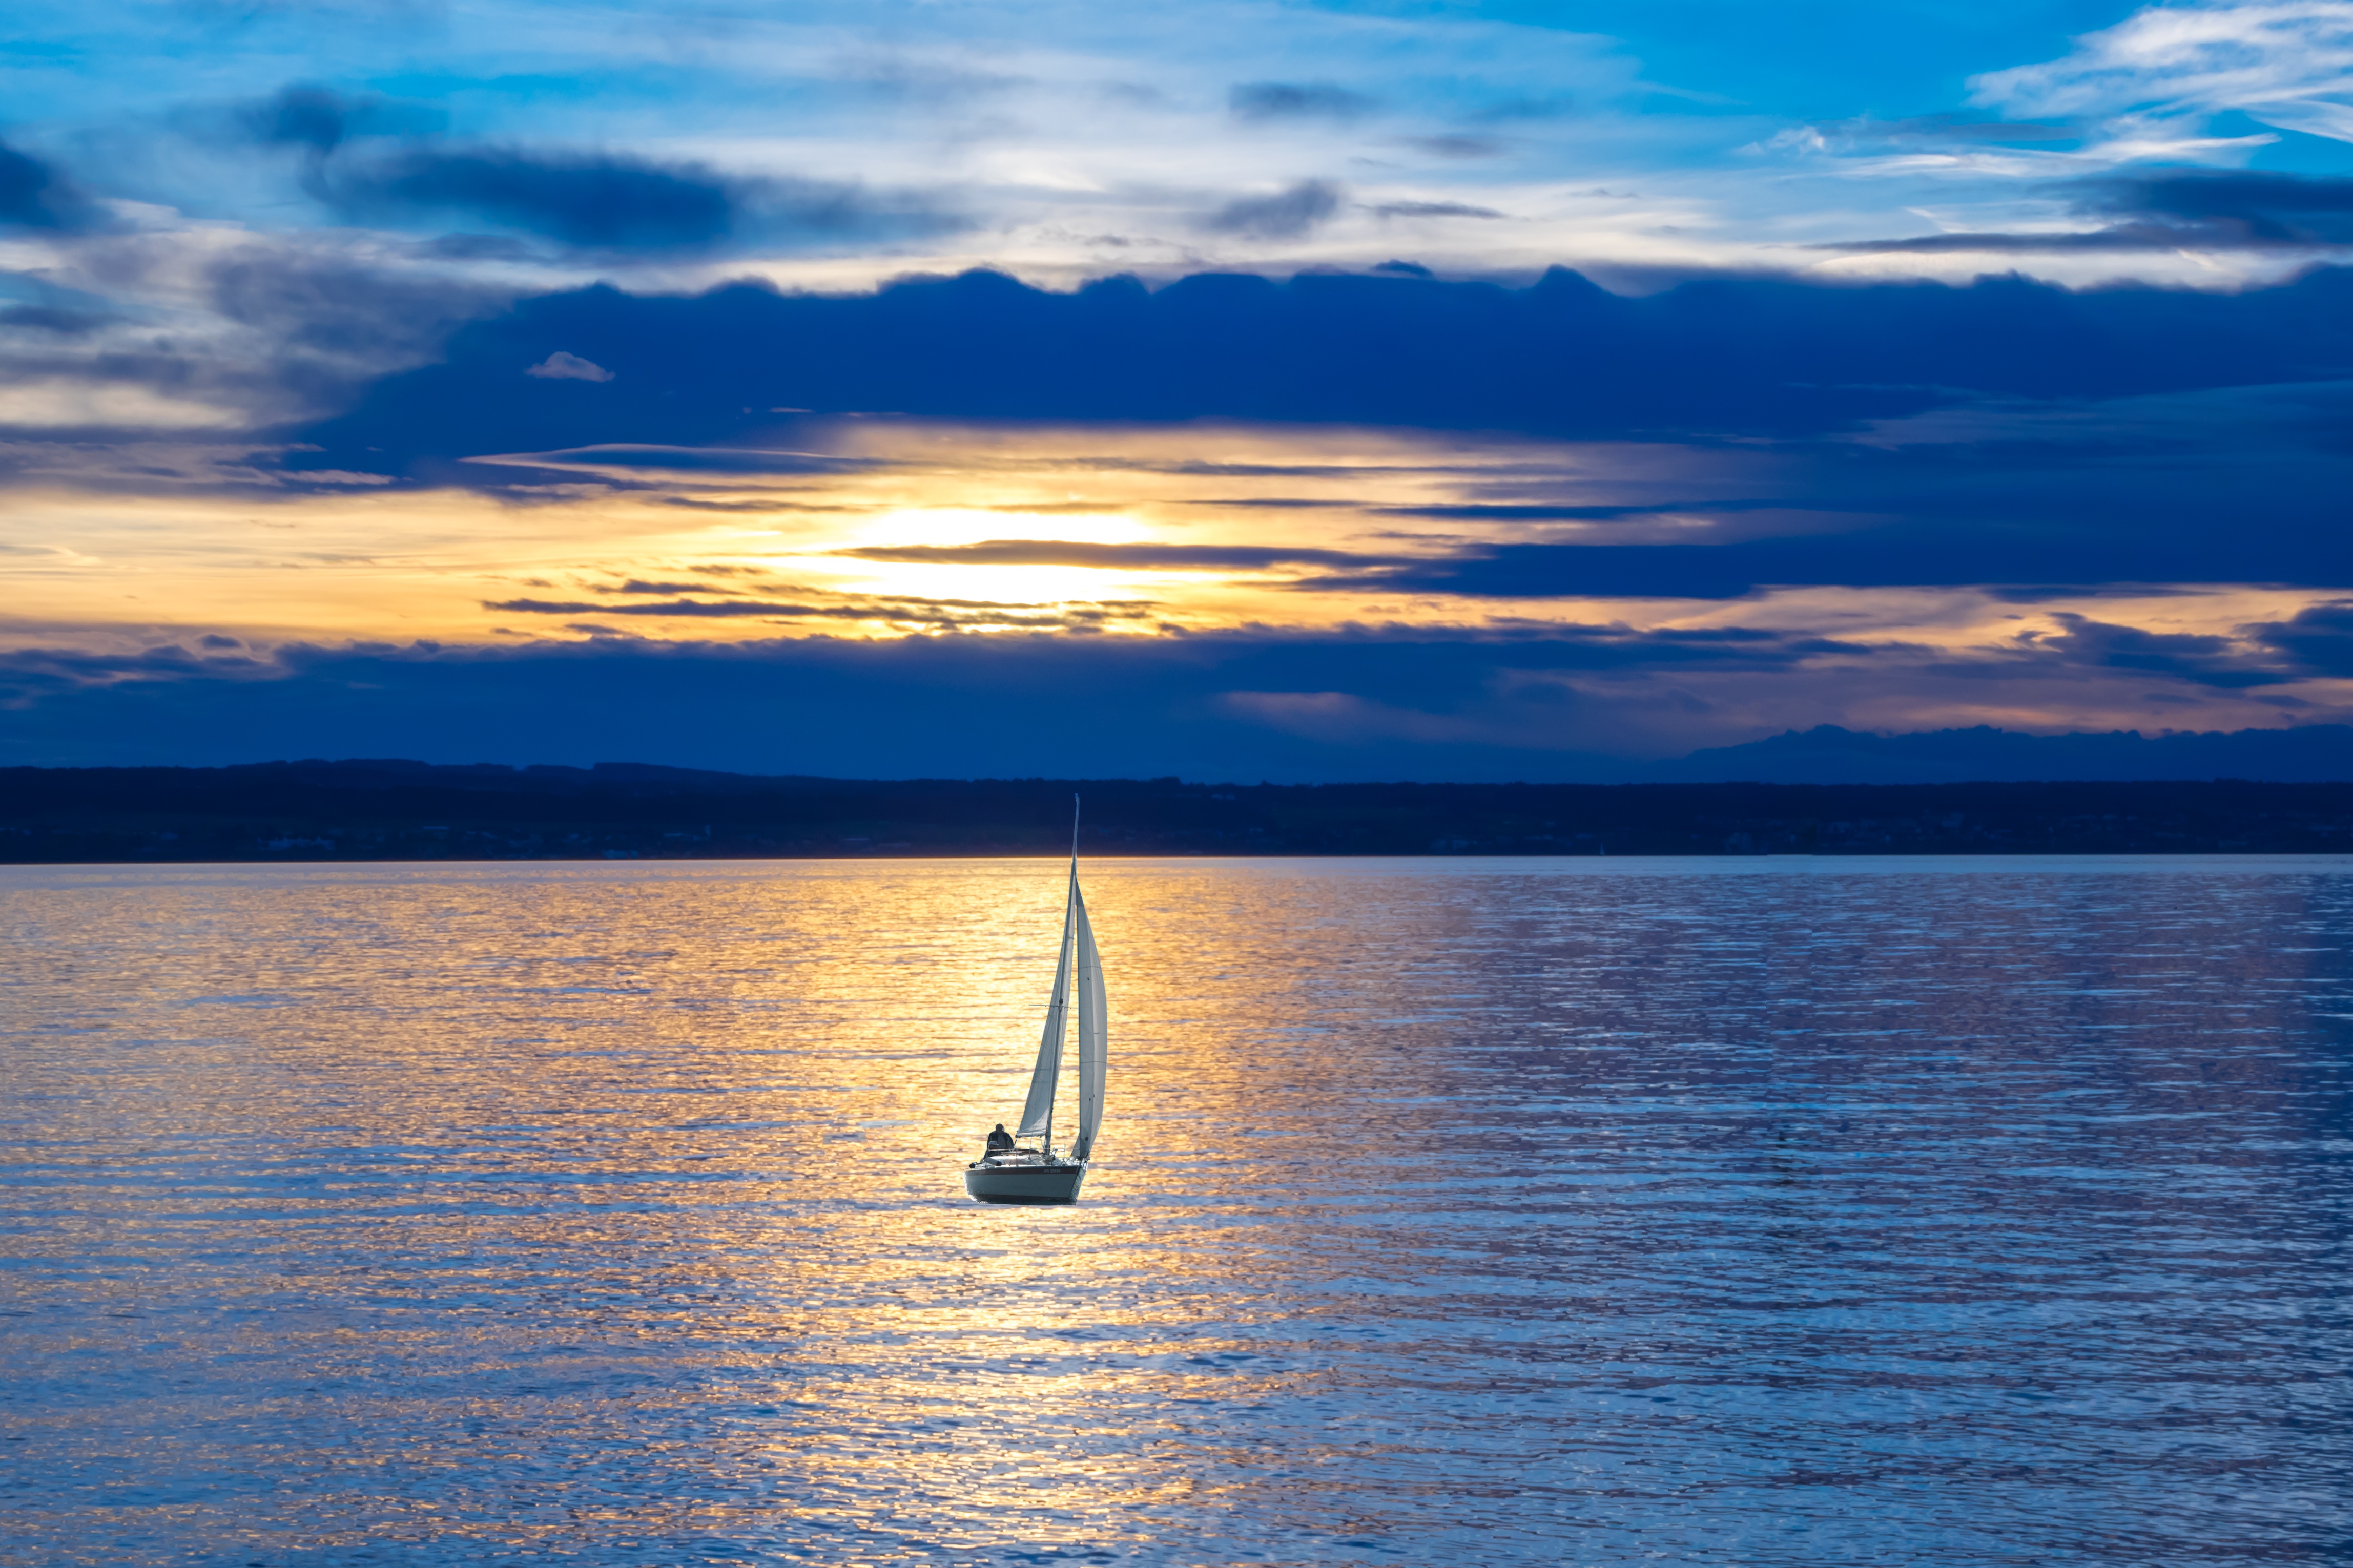 A lonely sailboat at sunset